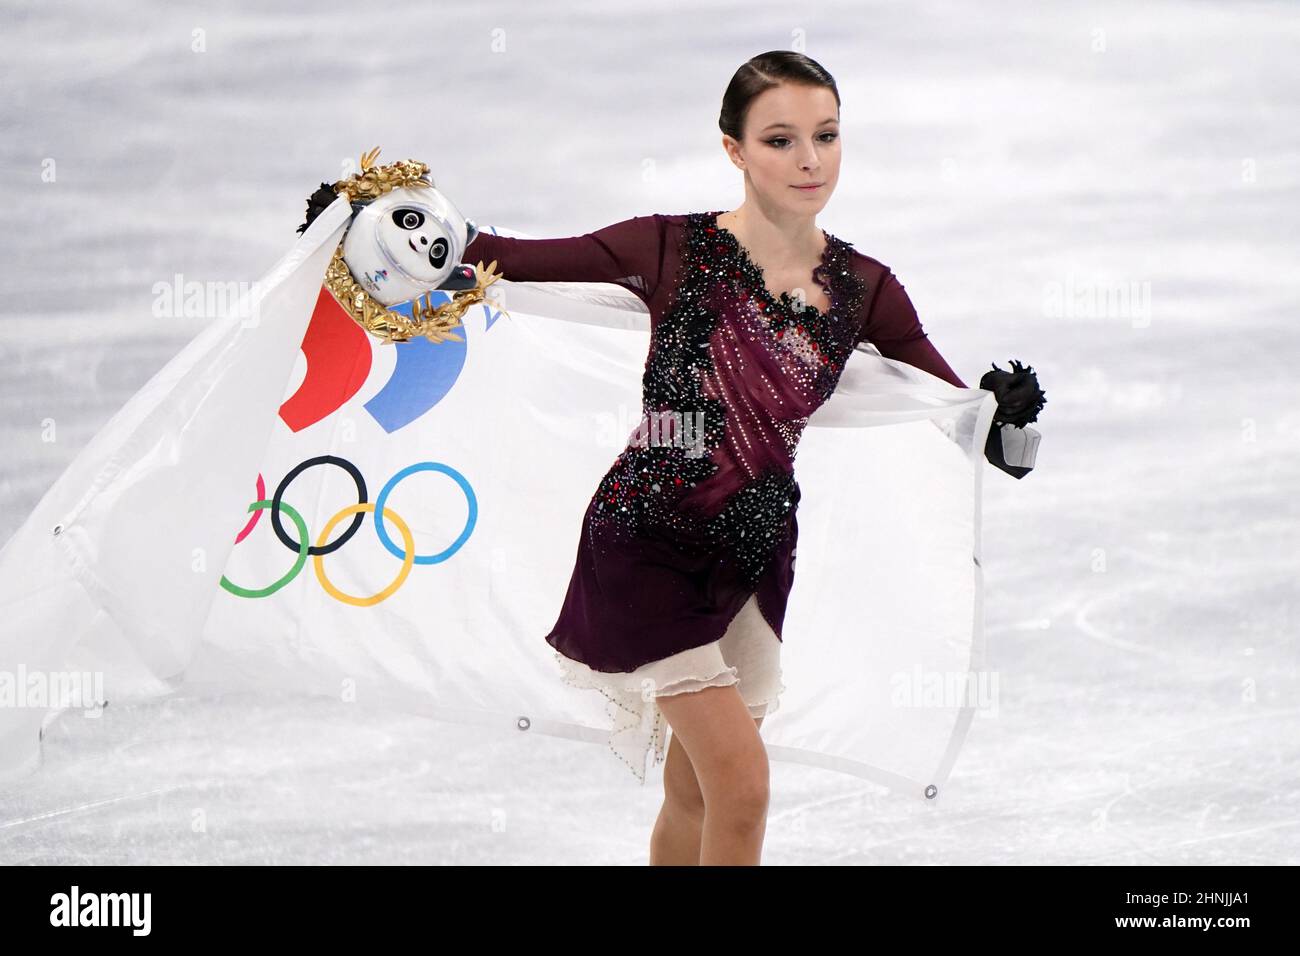 Beijing, China. 17th Feb, 2022. Anna Shcherbakova of Russia, skates with the.Russian Olympic Committee flag and her Bing Dwen Dwen mascot during the venue ceremony for the Women's Single Figure Skating Free Program in the Capital Indoor Stadium at the Beijing 2022 Winter Olympic on Thursday, February 17, 2022. Shcherbakova won the gold medal. Photo by Richard Ellis/UPI Credit: UPI/Alamy Live News Stock Photo